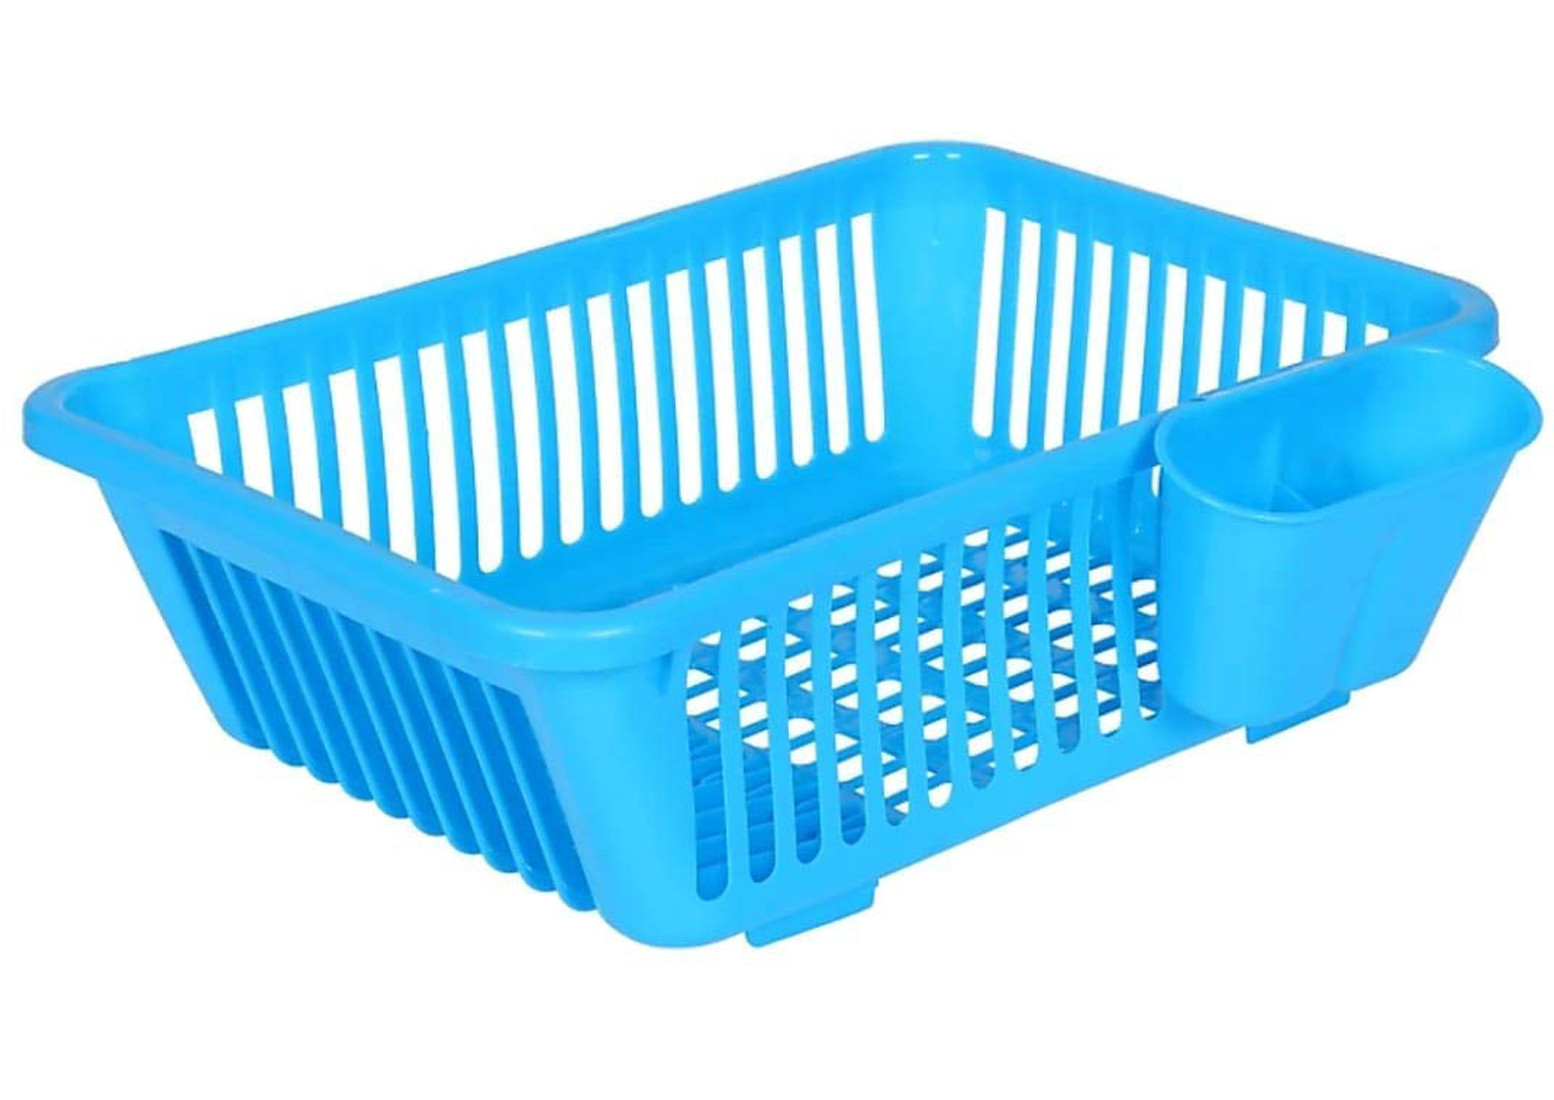 Kuber Industries  3 in 1 Large Durable Plastic Kitchen Sink Dish Rack Drainer Drying Rack Washing Basket with Tray for Kitchen, Dish Rack Organizers, Utensils Tools Cutlery (Blue)